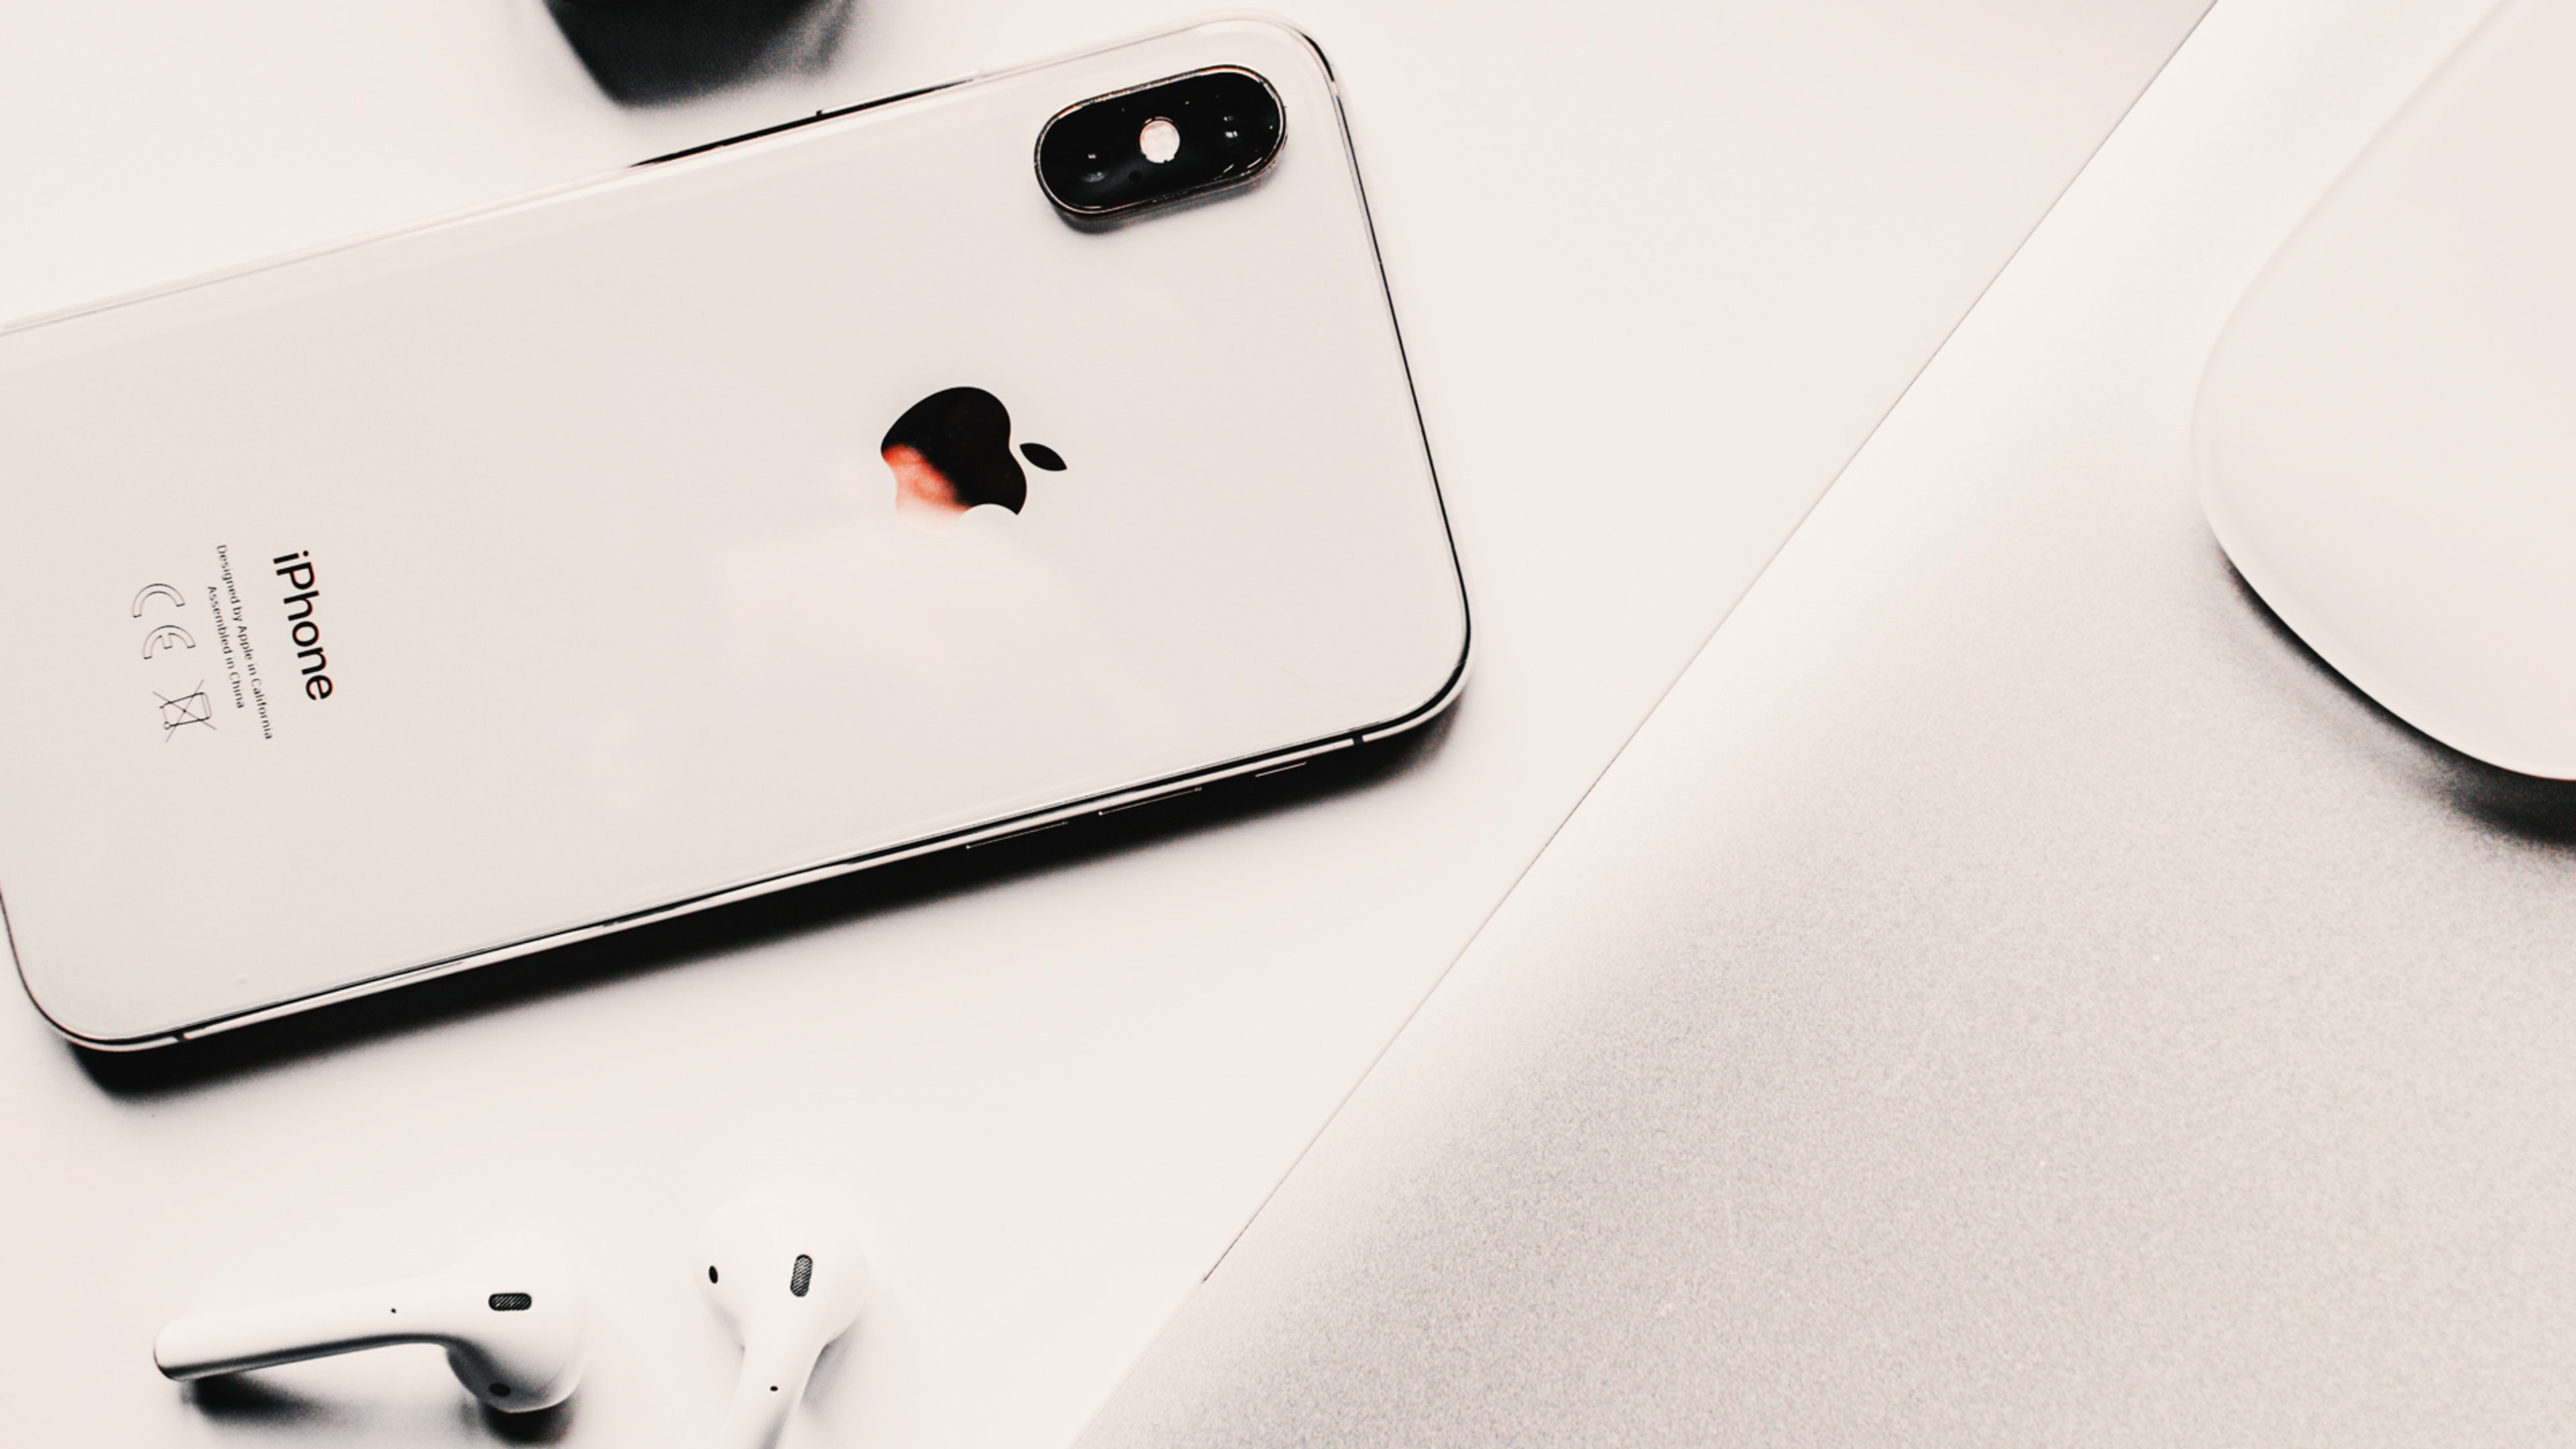 What to expect from Apple’s October iPhone event: iPhone 12, AirTags, over-the-ear AirPods, and more!